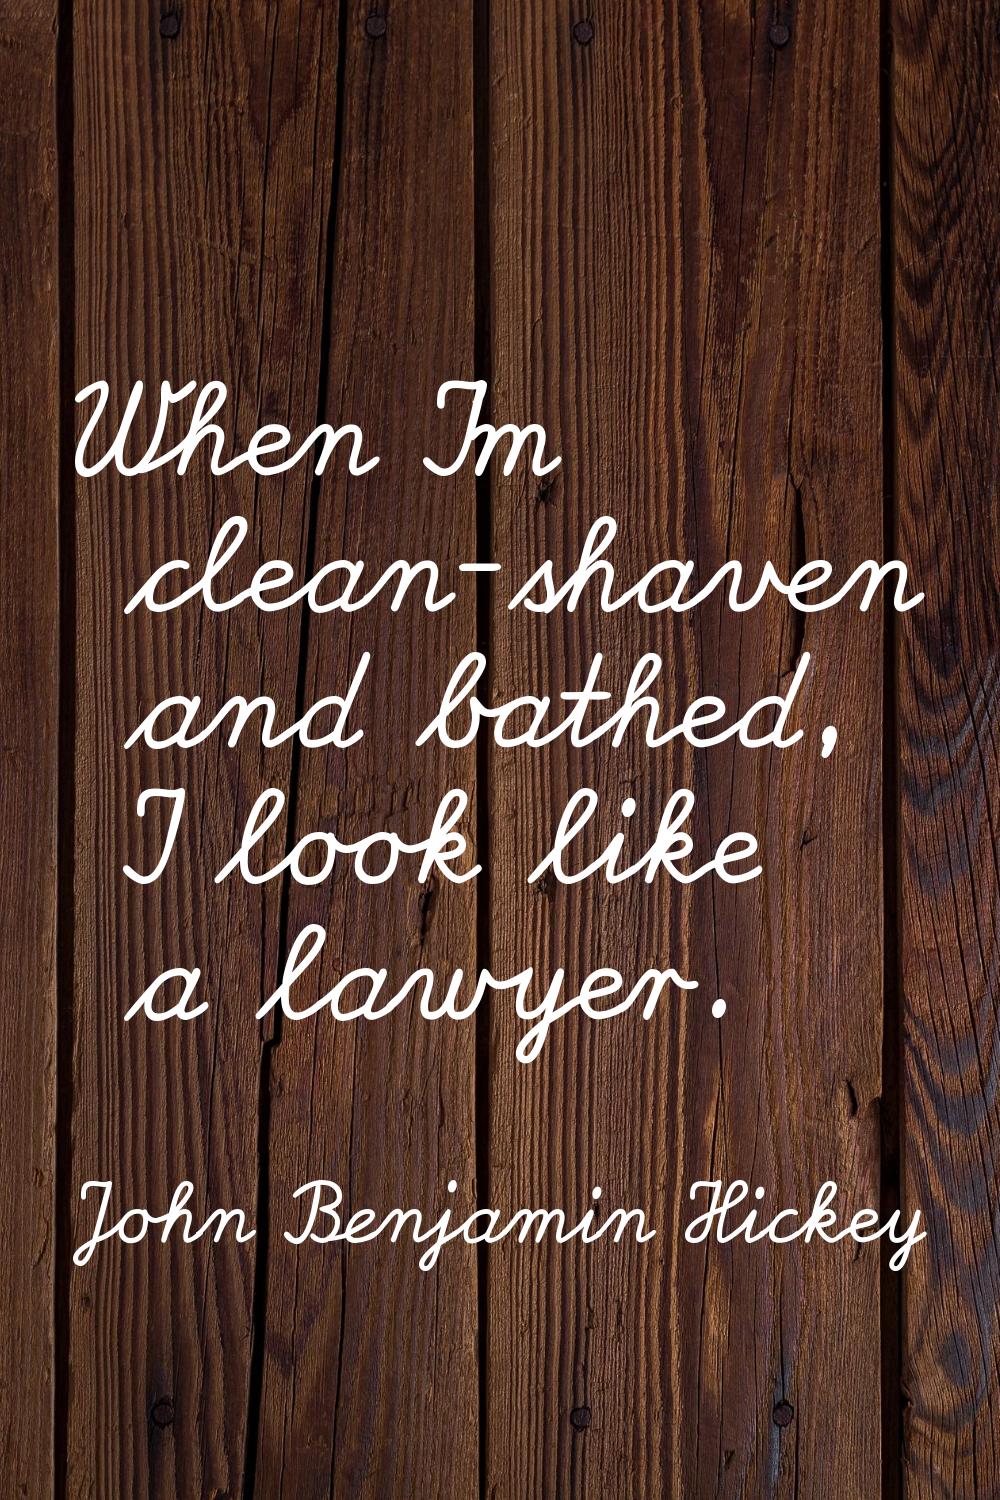 When I'm clean-shaven and bathed, I look like a lawyer.